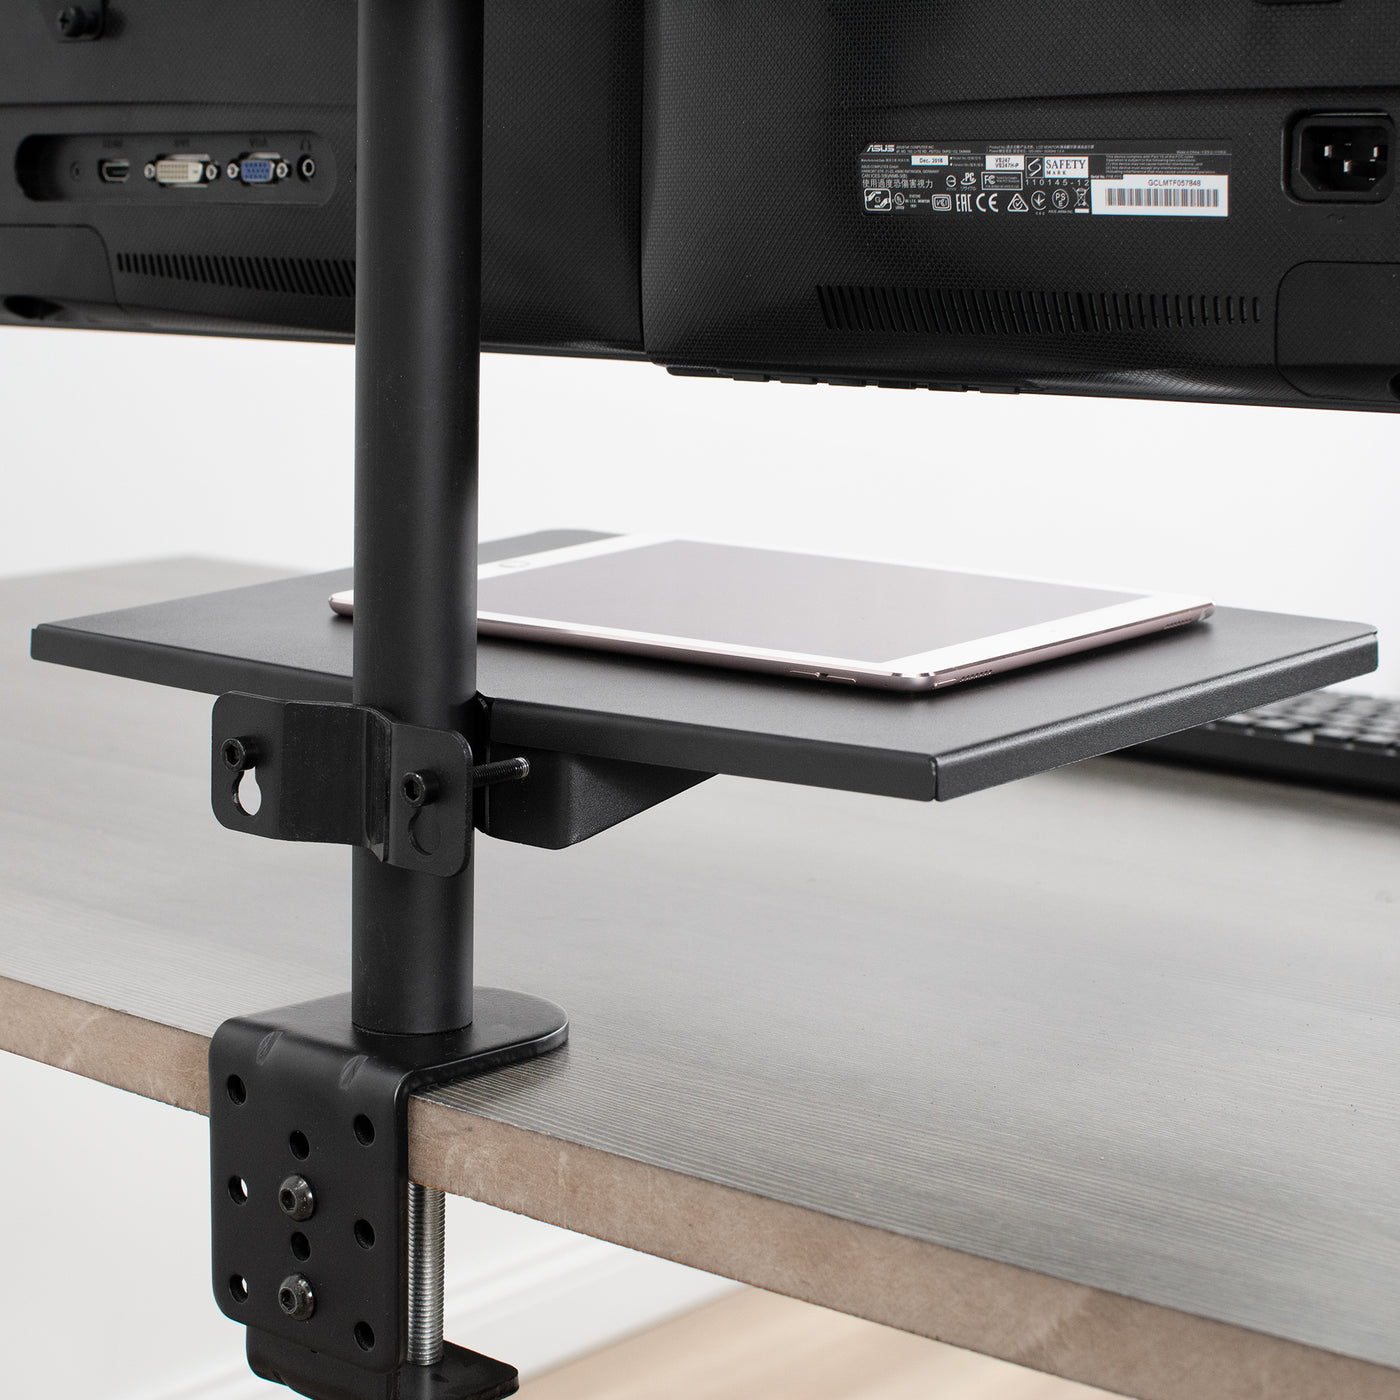 Clamp on a pole mount shelf to hold tablets, laptops, speakers, or any other office equipment you want to elevate.